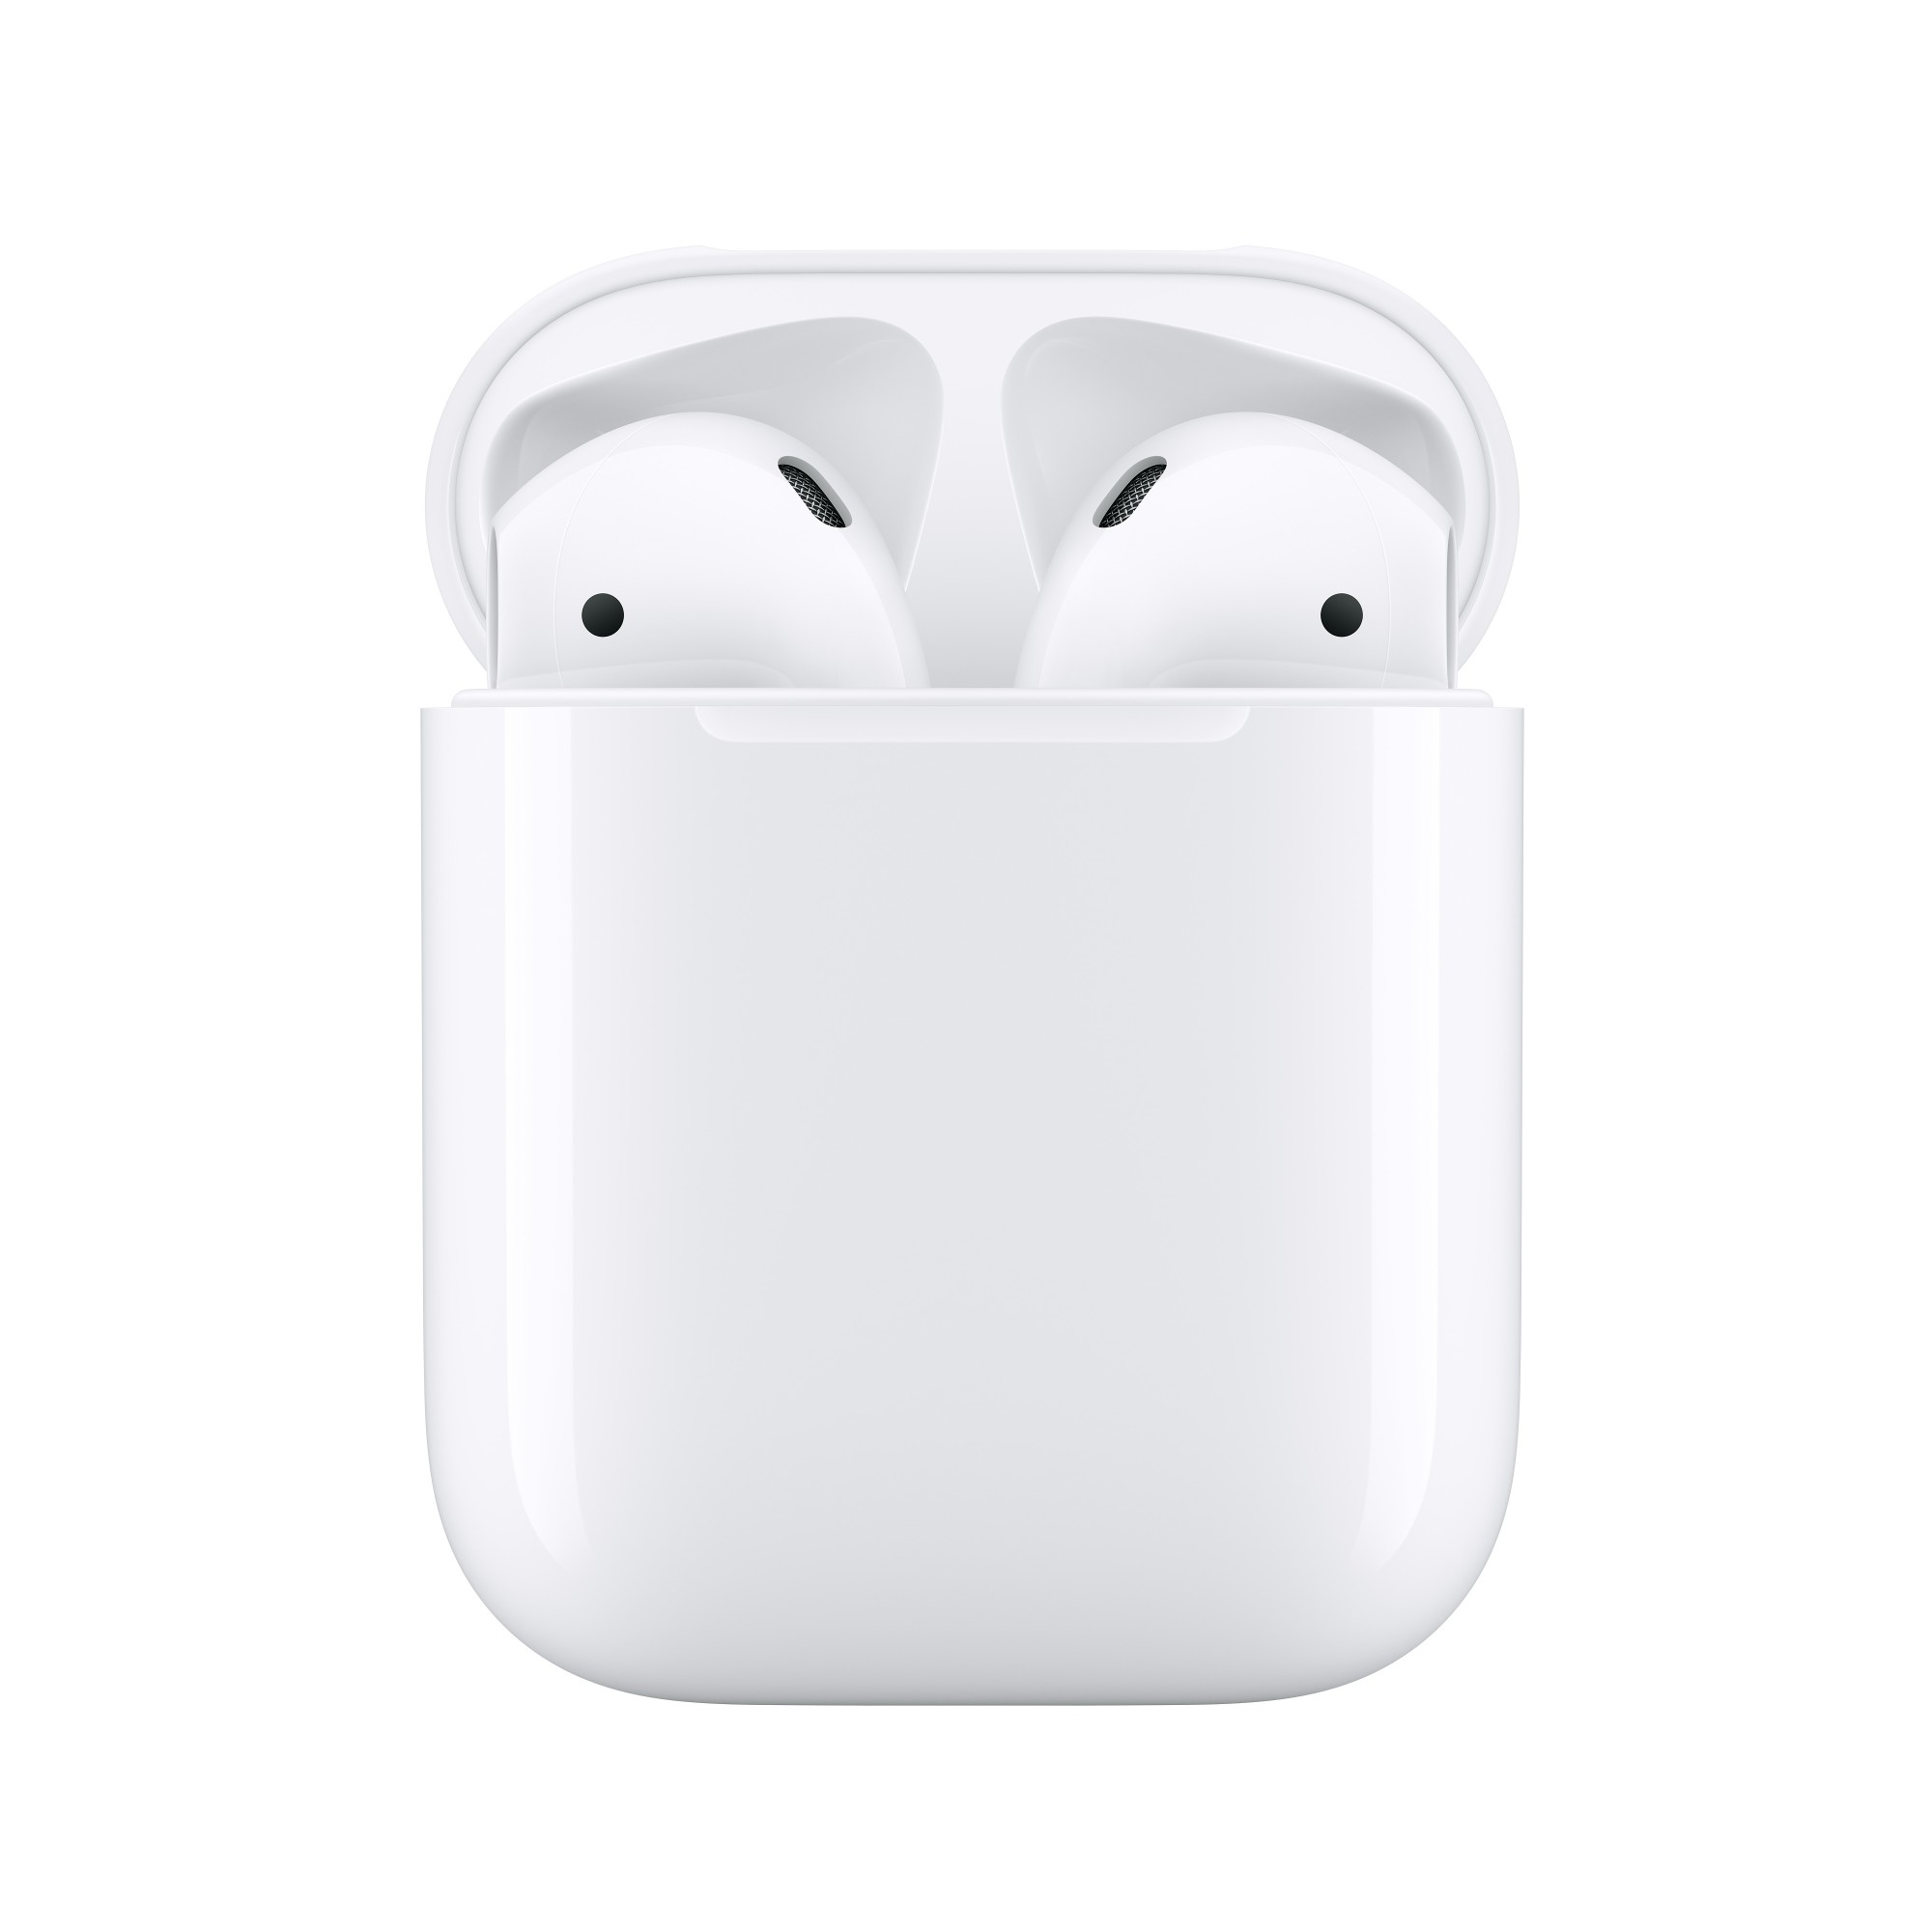 Apple AirPods (2nd generation) AirPods Headphones True Wireless Stereo (TWS) In-ear Calls/Music Bluetooth White - MV7N2ZM/A